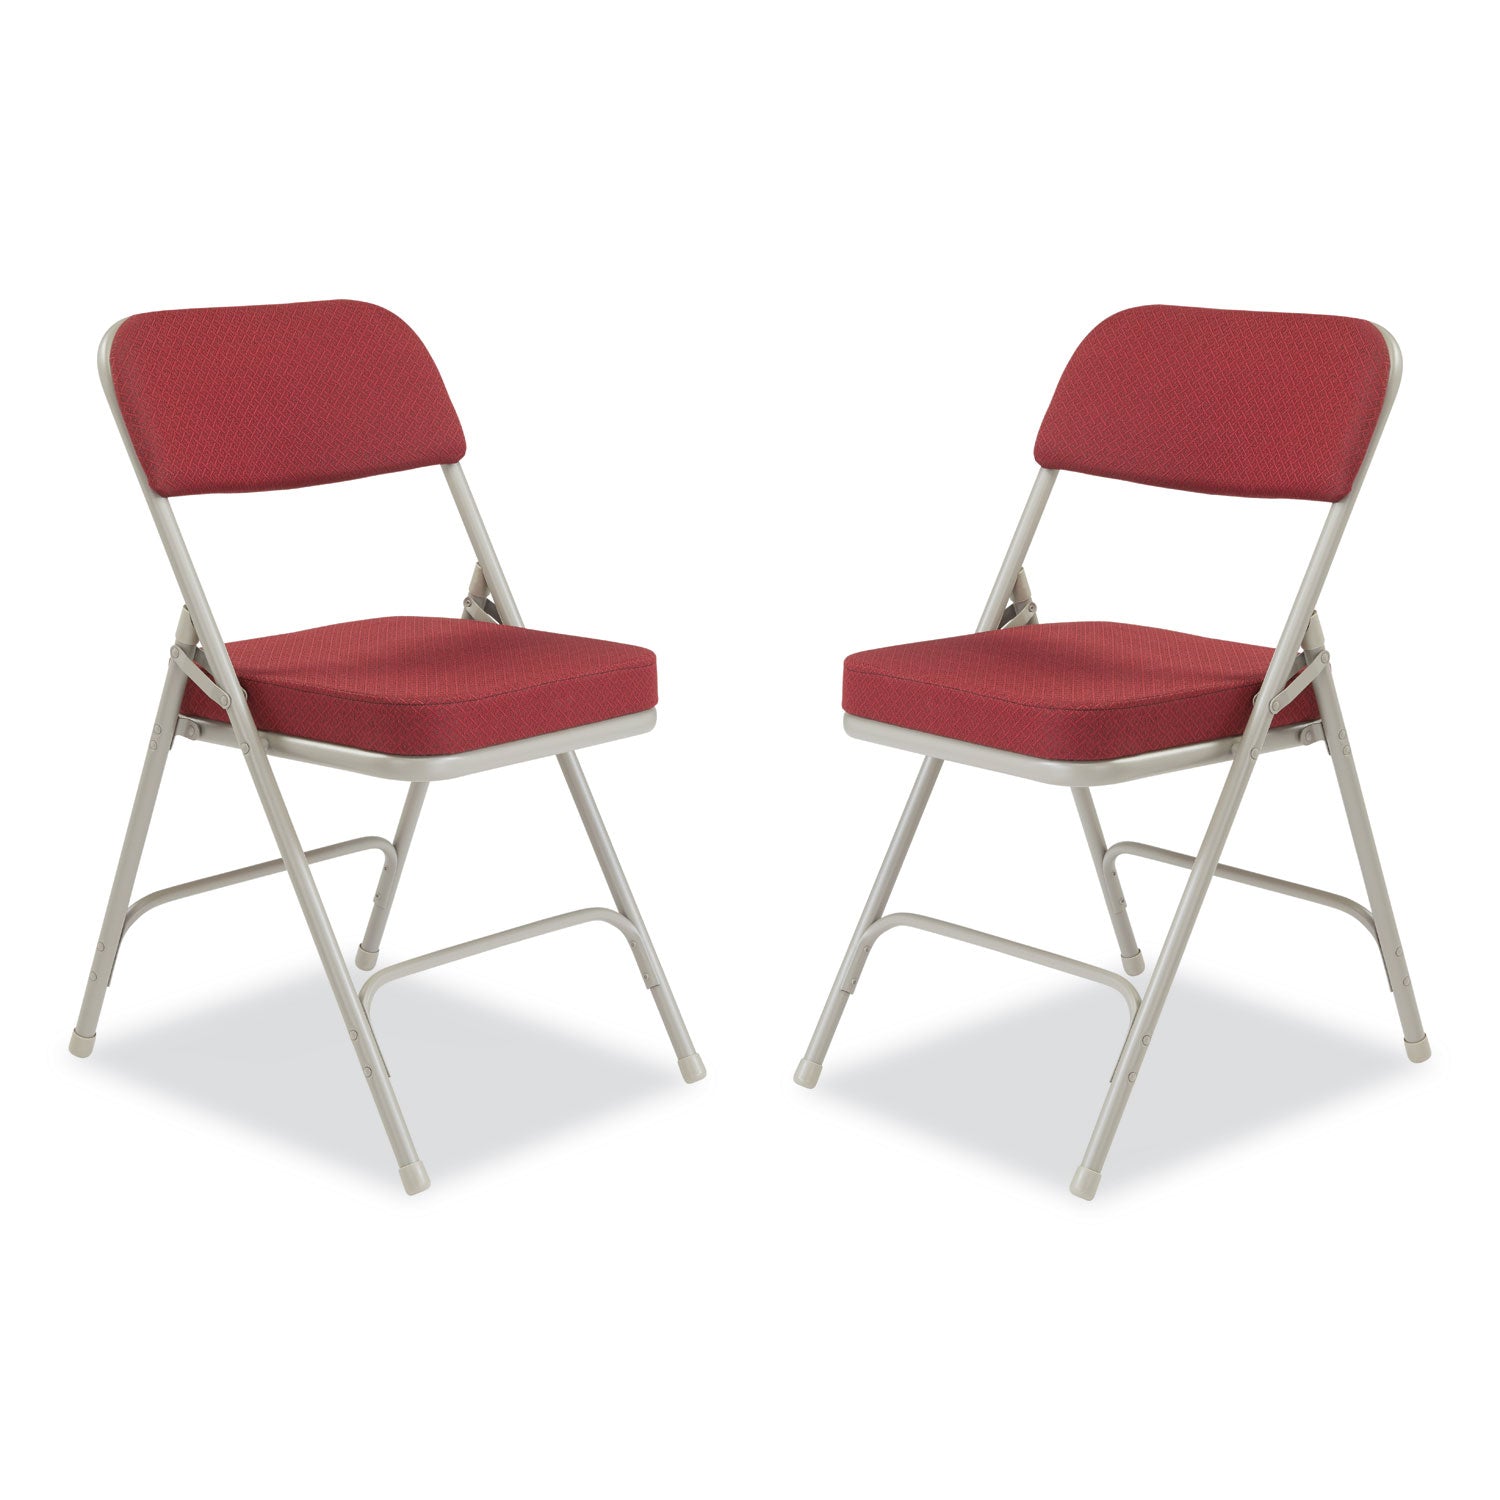 3200-series-premium-fabric-dual-hinge-folding-chair-supports-300lb-burgundy-seat-back-gray-base2-ctships-in-1-3-bus-days_nps3218 - 1